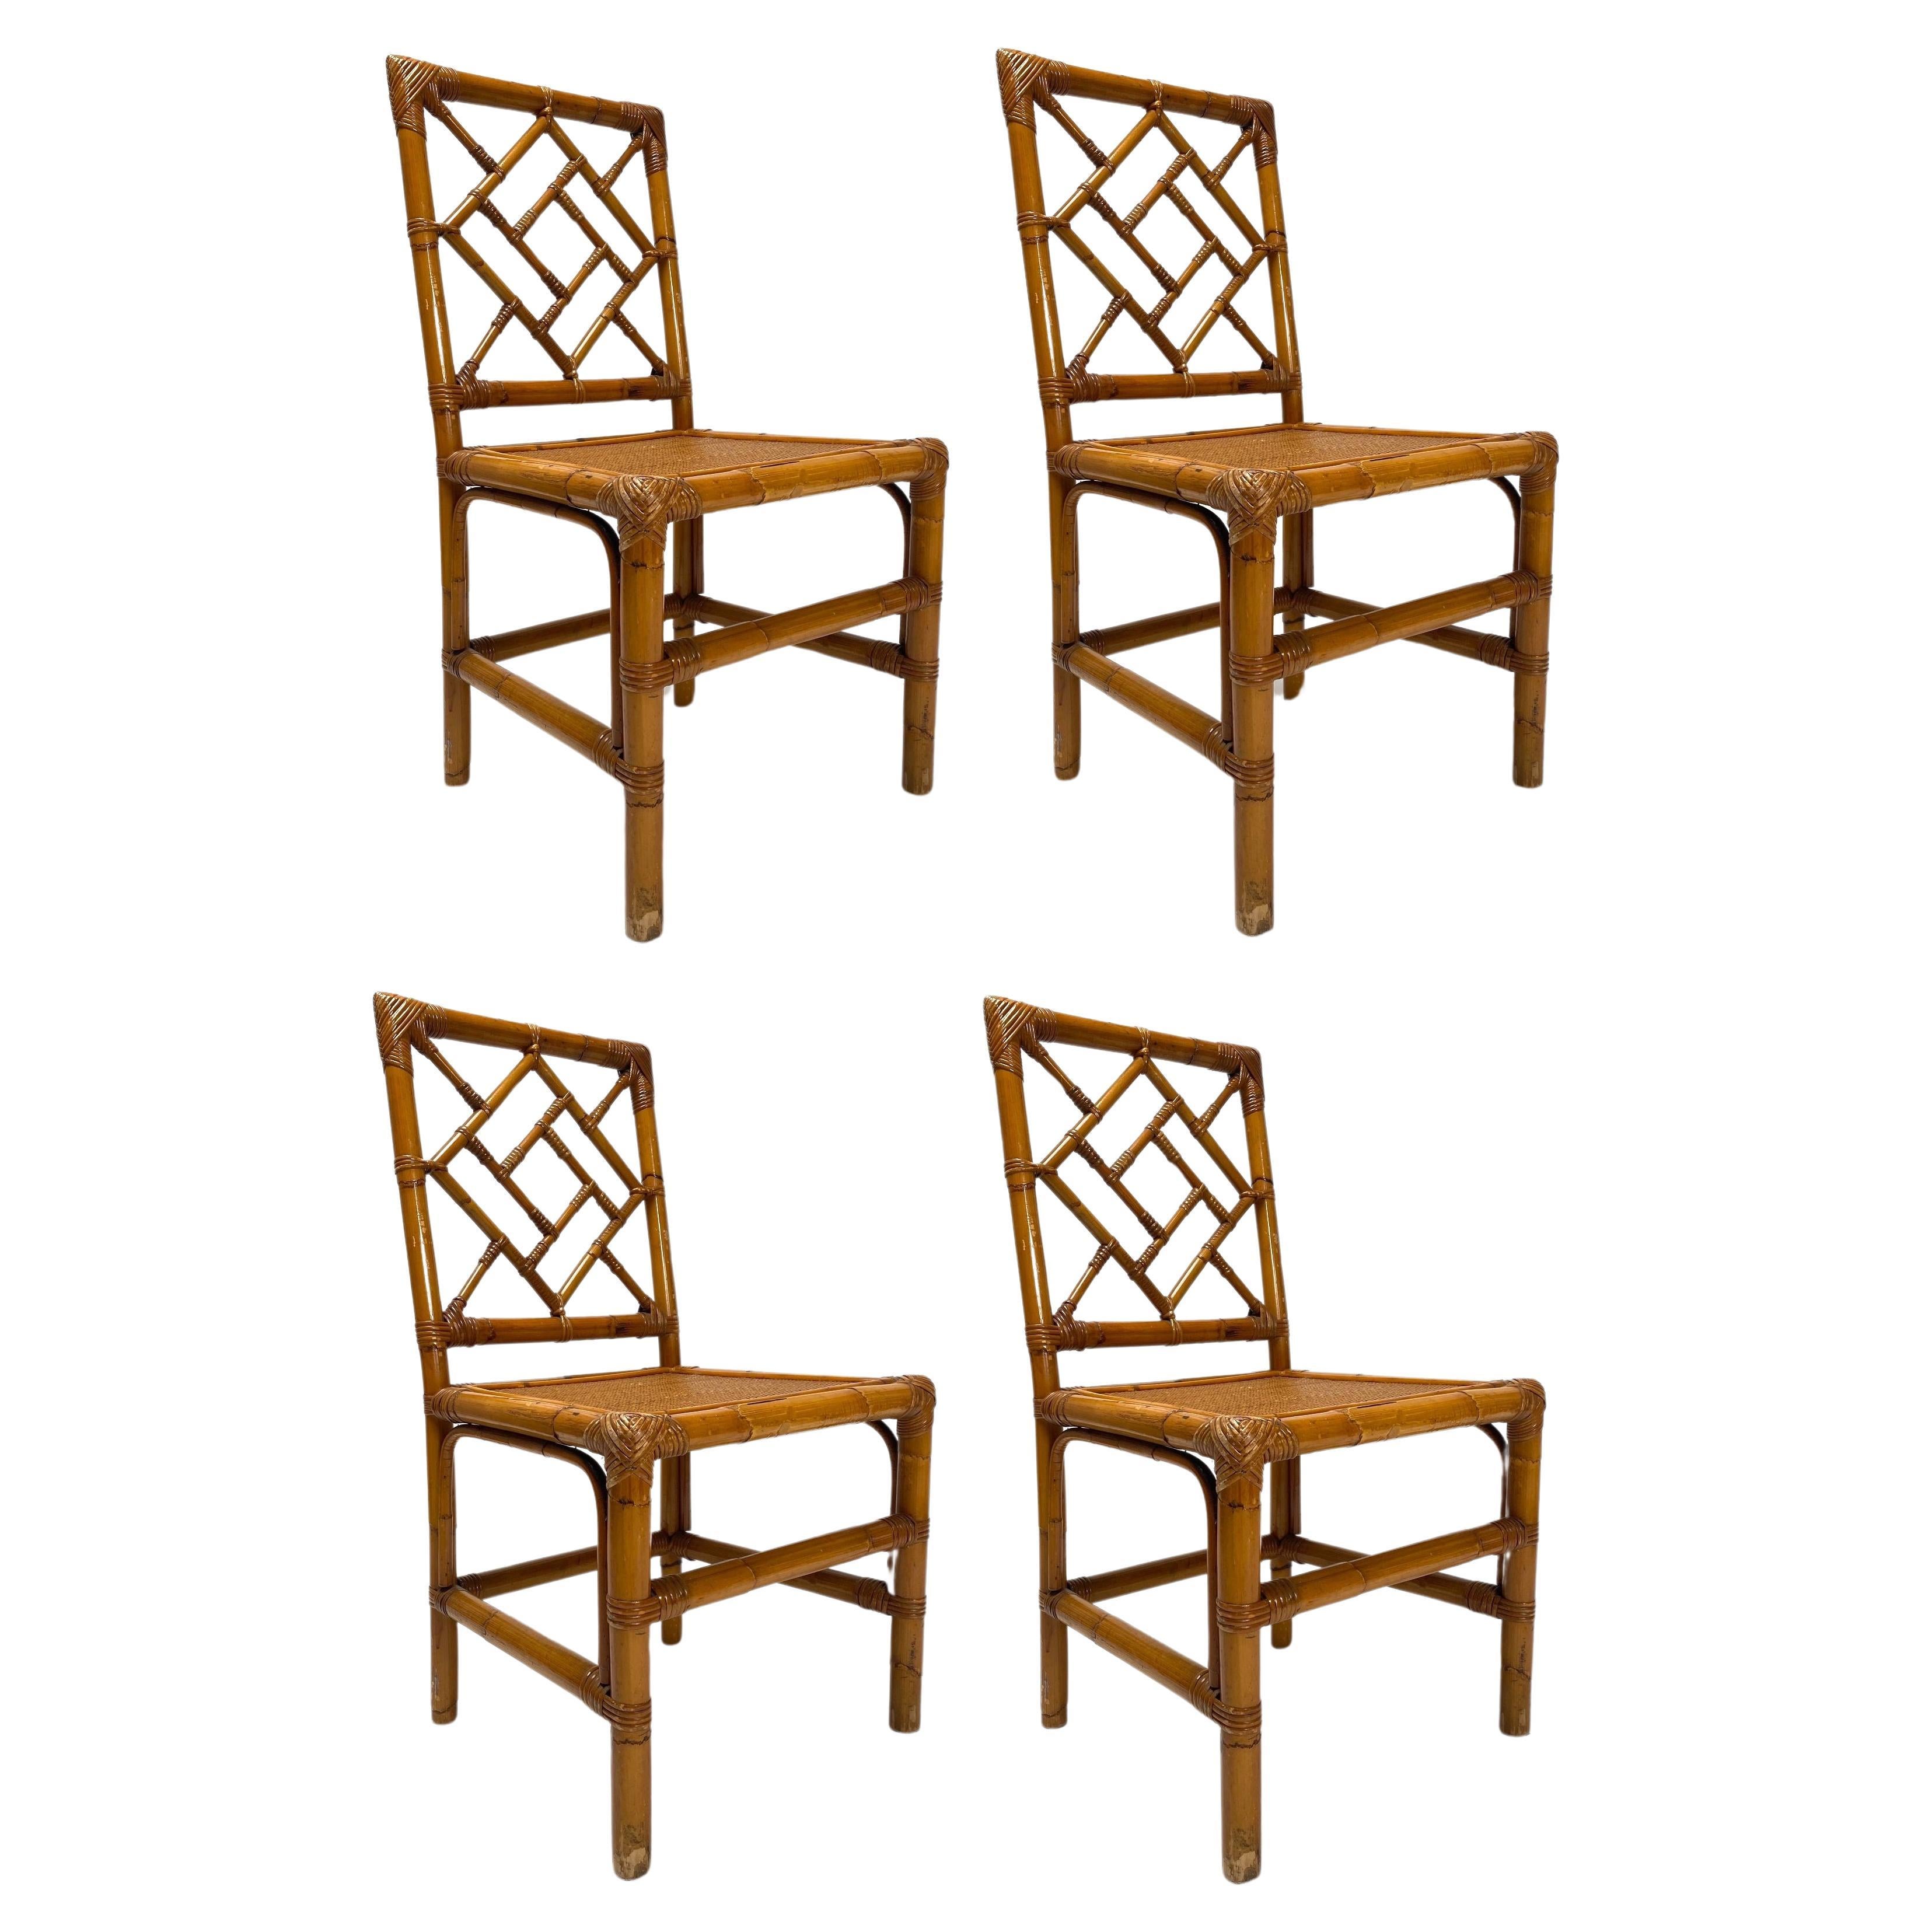 Set of 4 Bamboo chairs by Vivai del Sud, Italy, 1970s For Sale